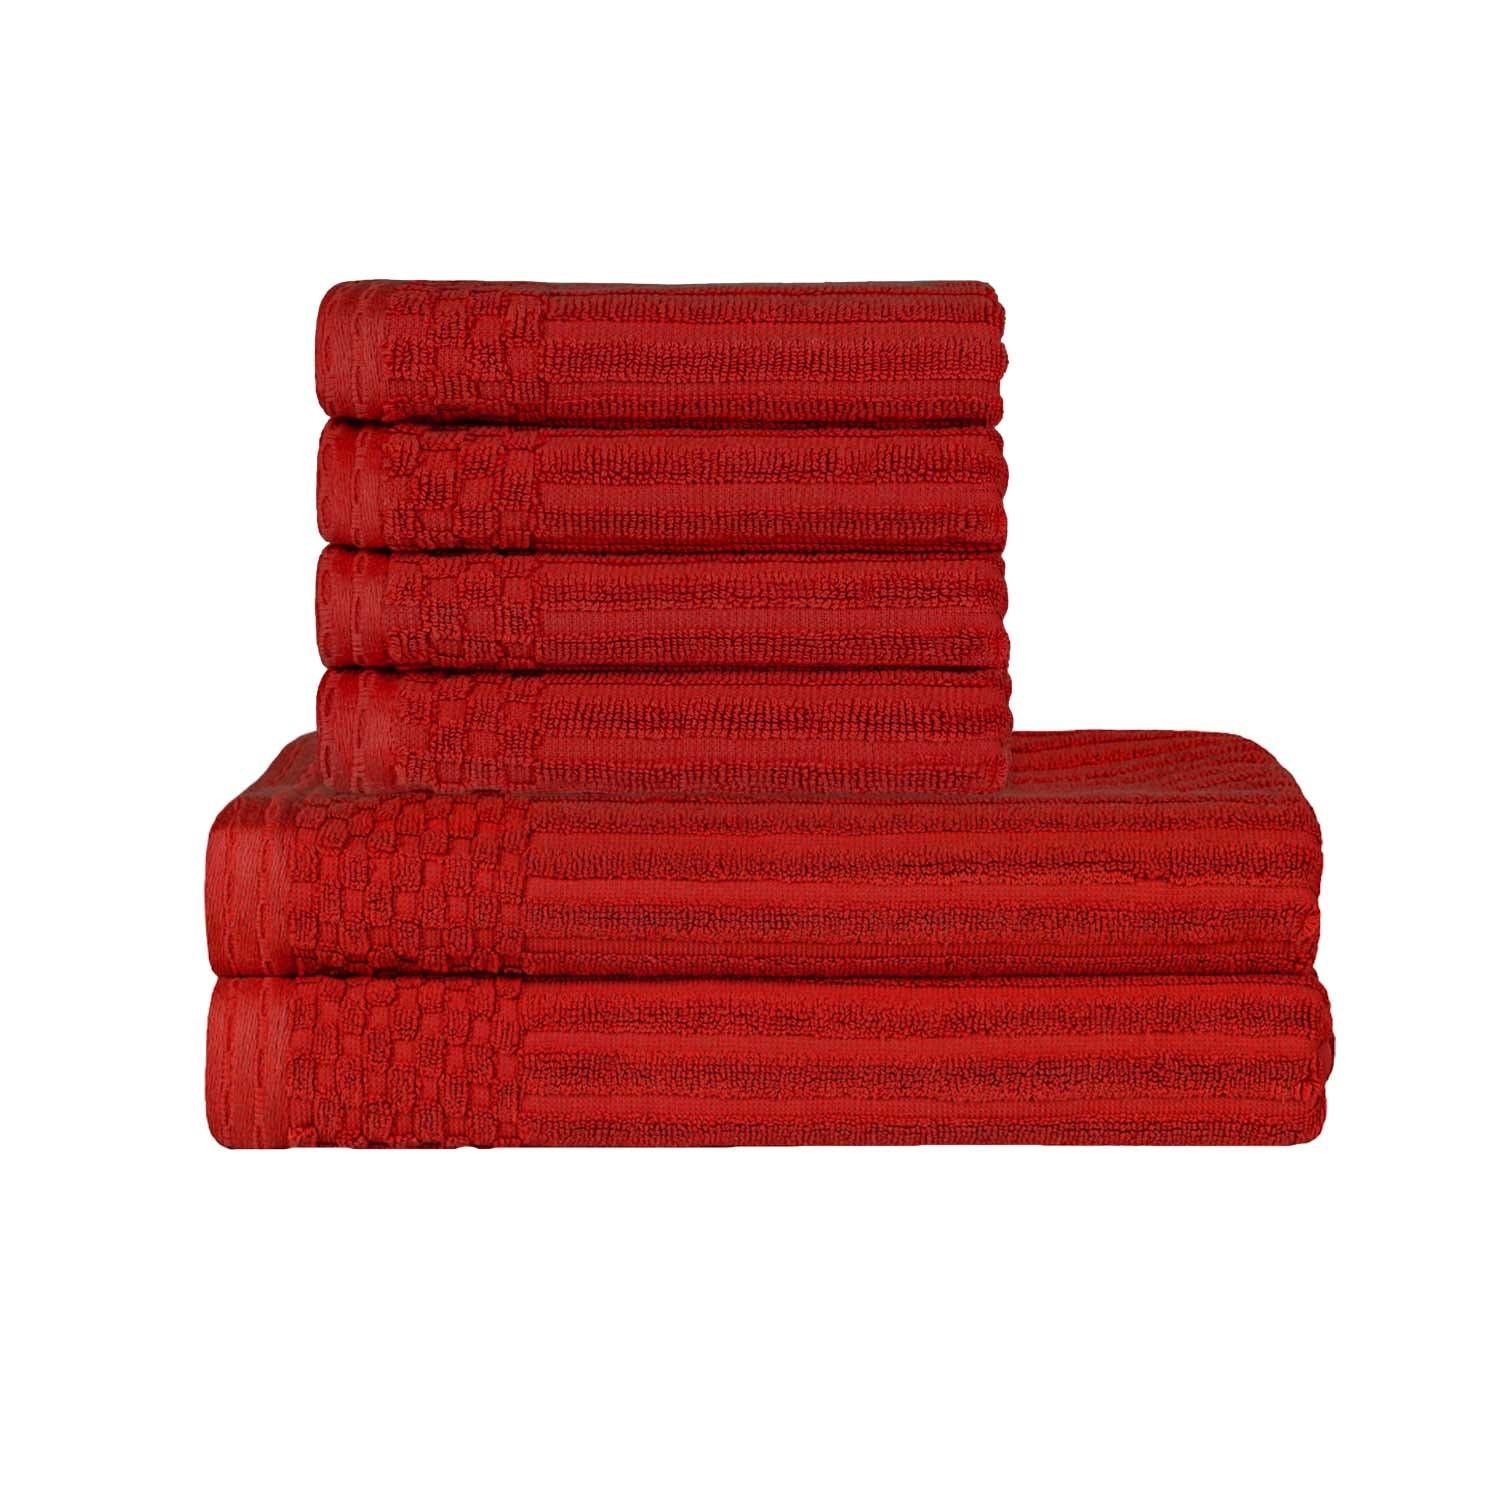  Superior Soho Ribbed Textured Cotton Ultra-Absorbent Hand and Bath Towel Set - Burgundy